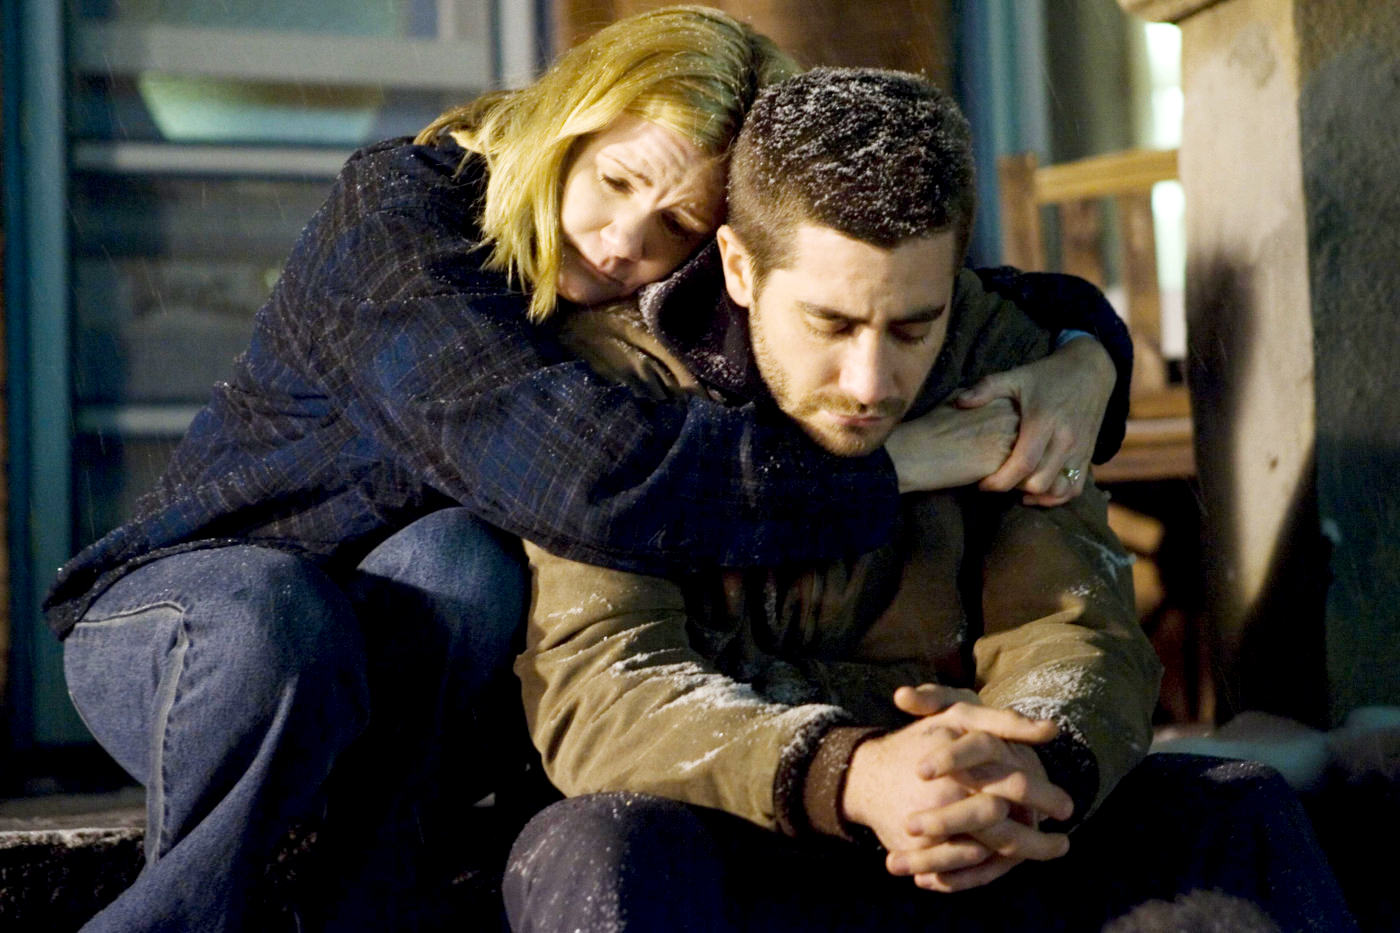 Mare Winningham stars as Elsie Cahill and Jake Gyllenhaal stars as Tommy Cahill in Lionsgate Films' Brothers (2009)